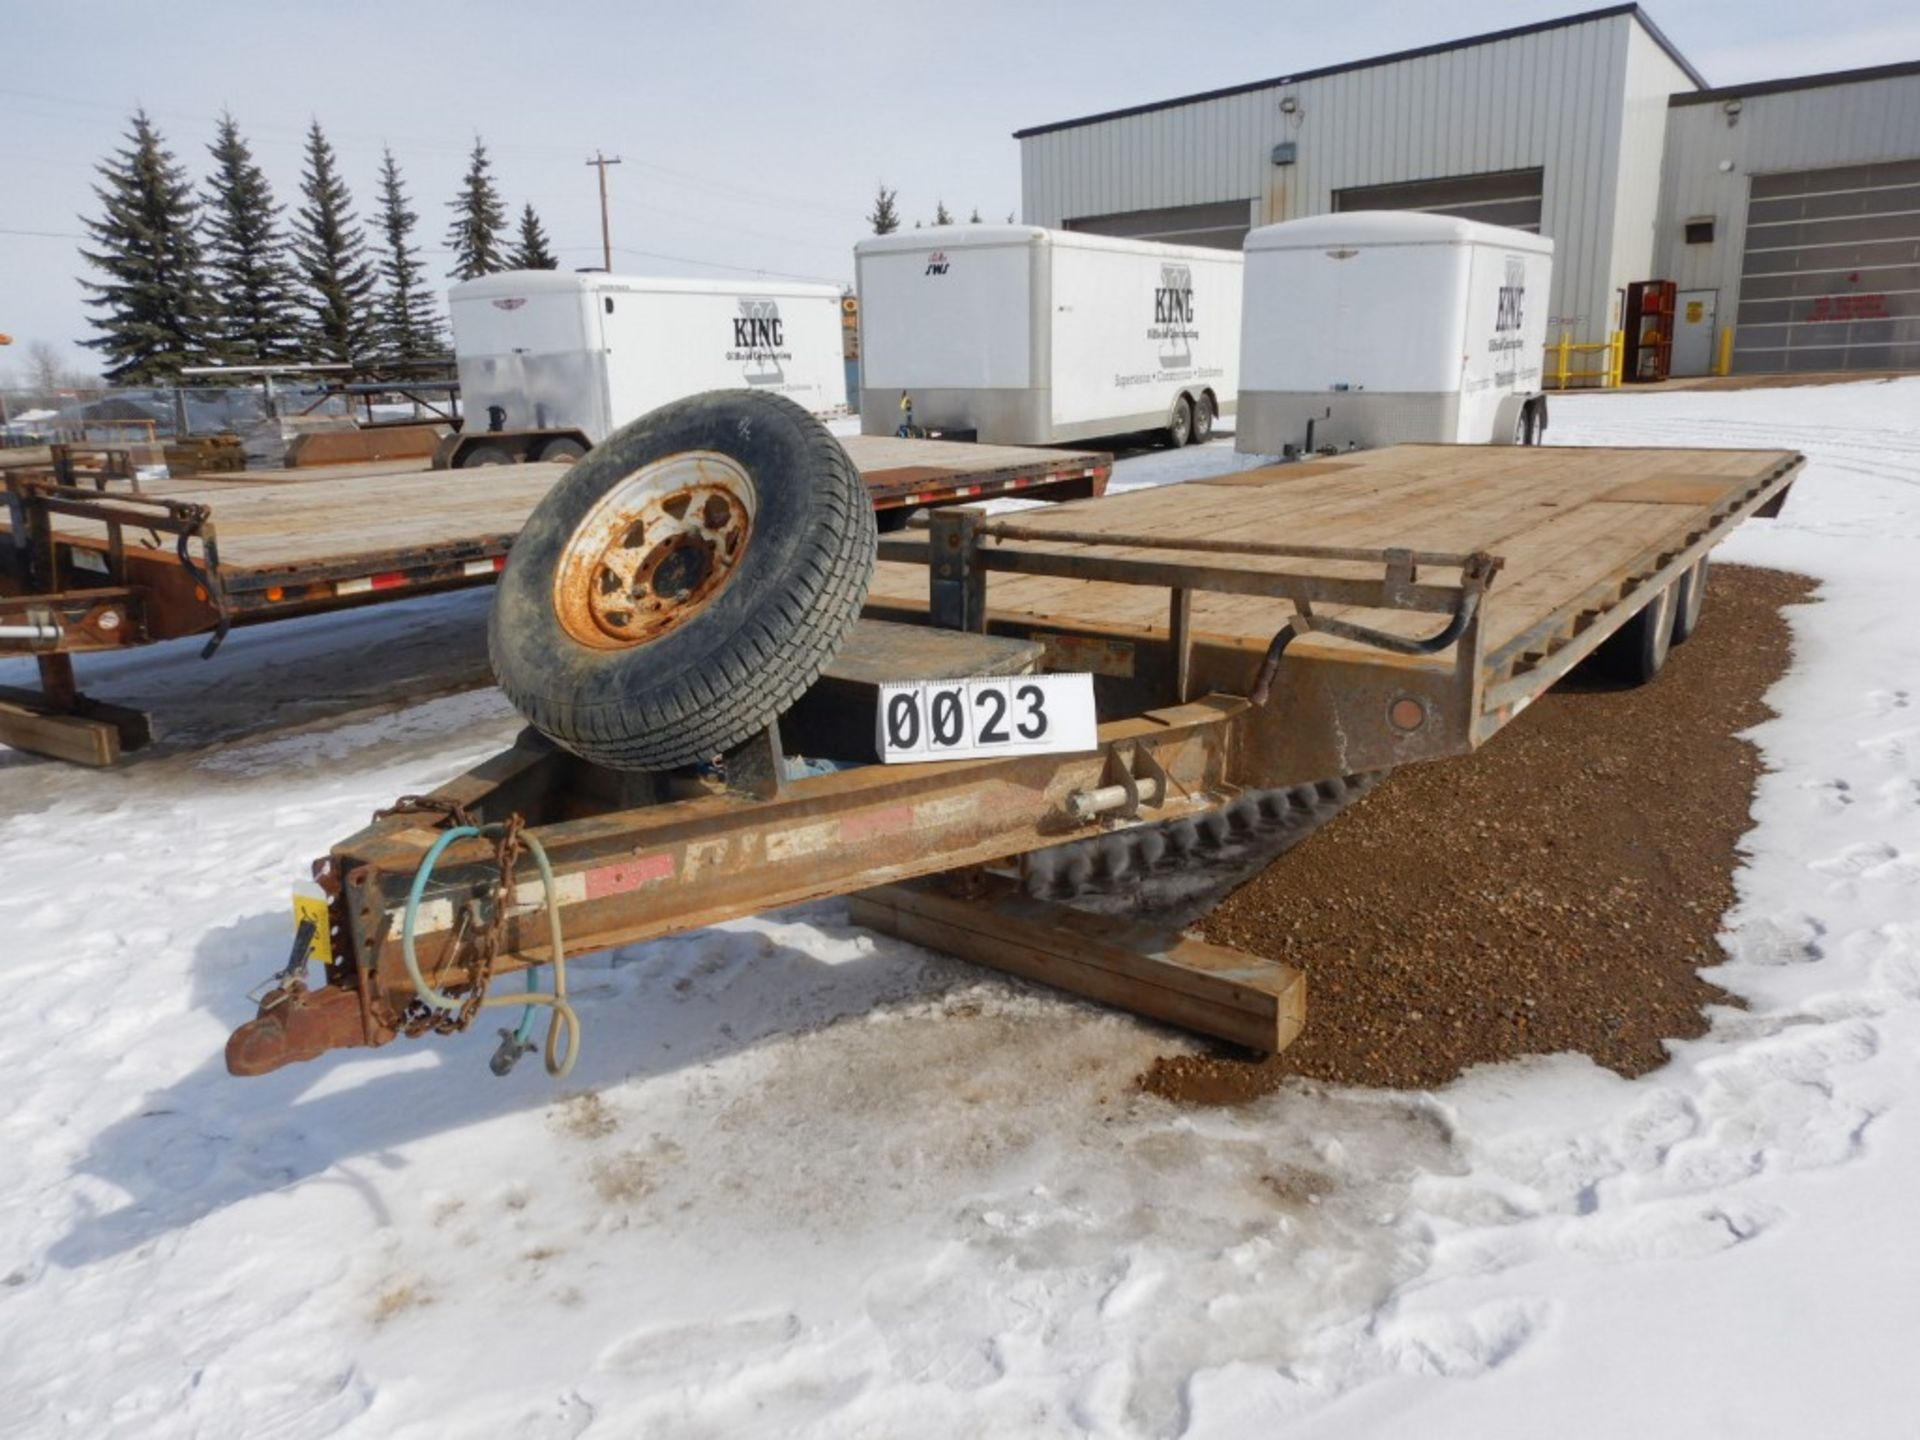 2013 PJ T/A 14000LB DECK-OVER EQUIPMENT TRAILERS W/RAMPS, BALL HITCH, 8'6" X 24FT